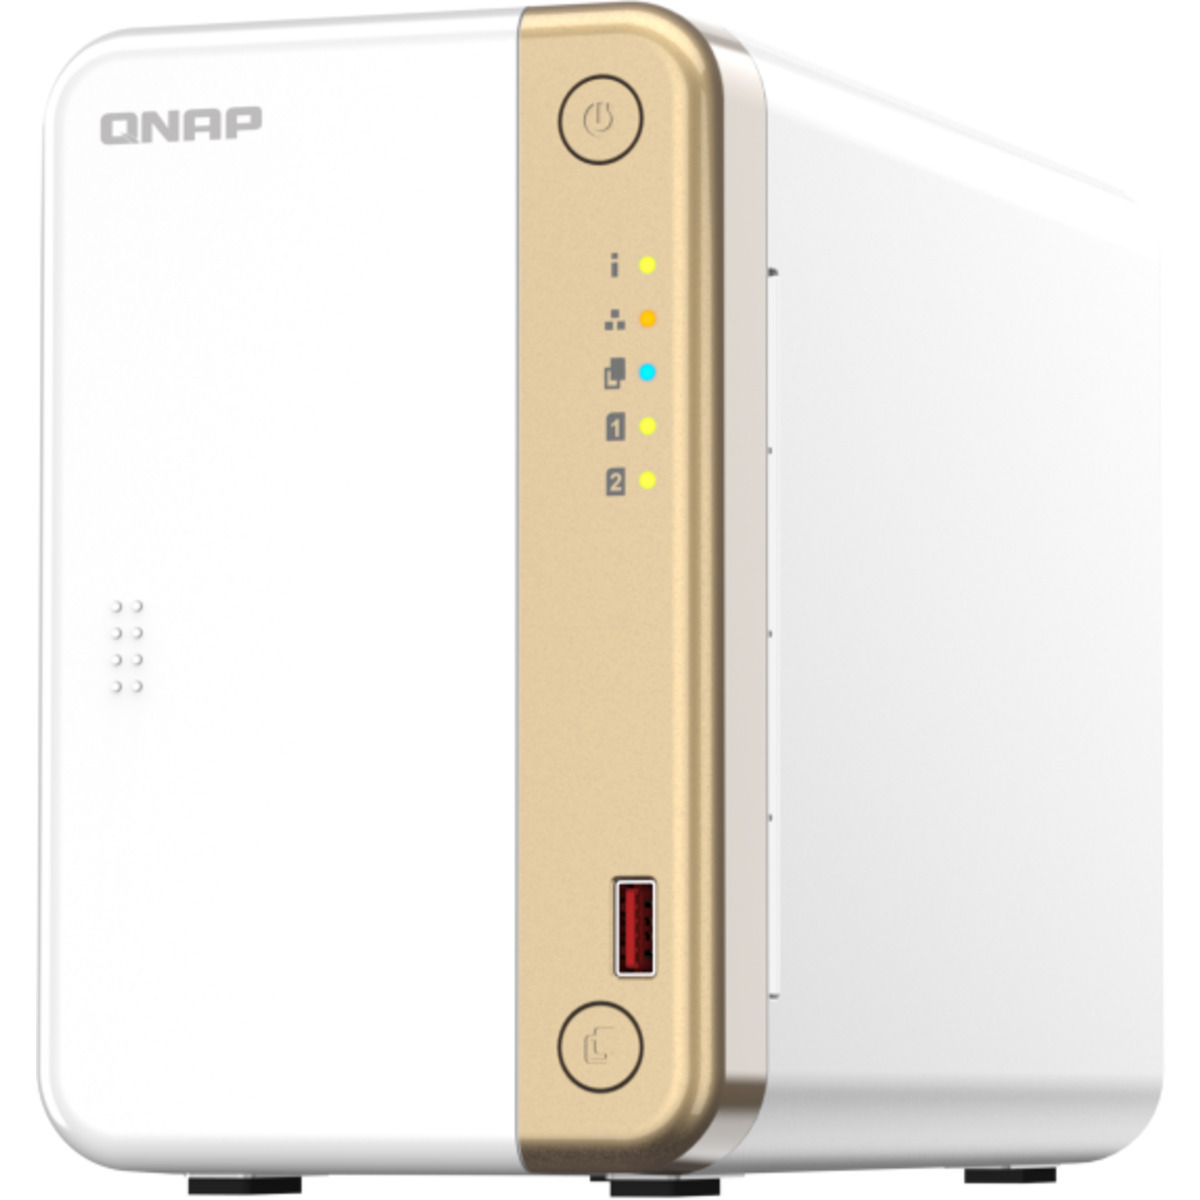 QNAP TS-262 24tb 2-Bay Desktop Personal / Basic Home / Small Office NAS - Network Attached Storage Device 2x12tb Western Digital Gold WD121KRYZ 3.5 7200rpm SATA 6Gb/s HDD ENTERPRISE Class Drives Installed - Burn-In Tested TS-262